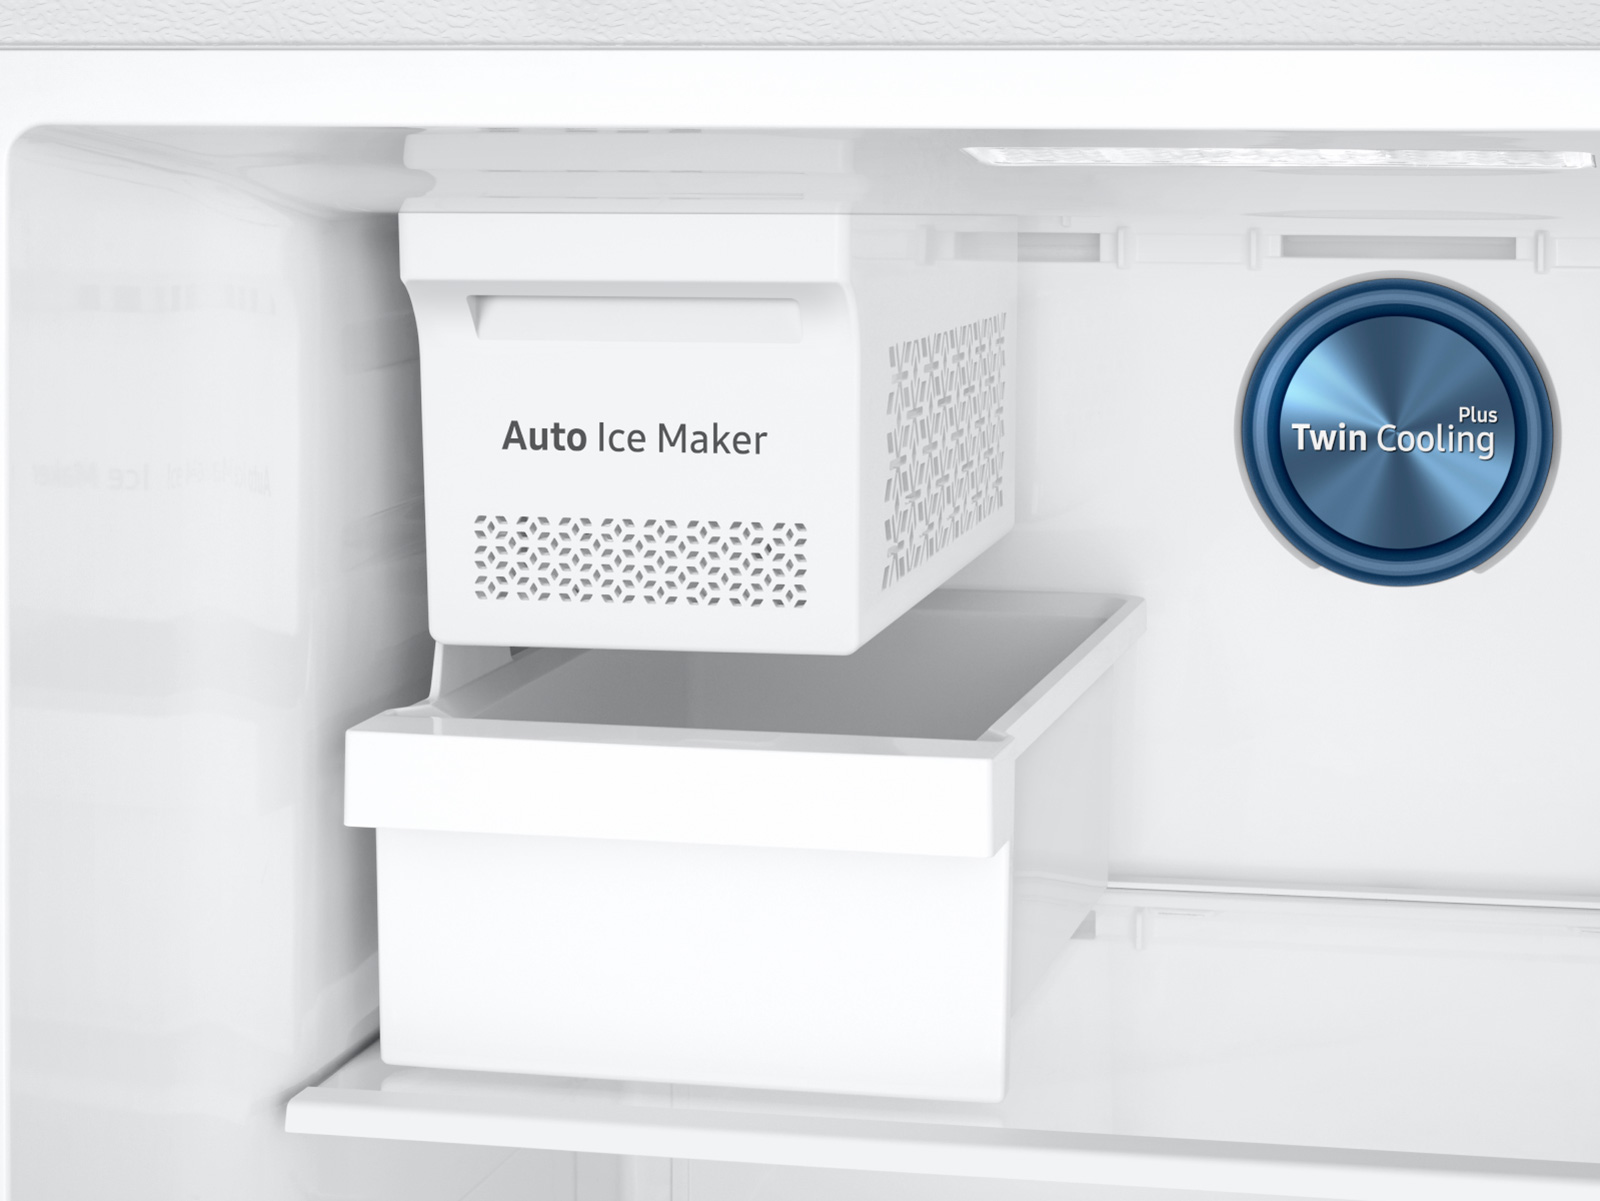 Thumbnail image of 18 cu. ft. Top Freezer Refrigerator with FlexZone&trade; and Ice Maker in White